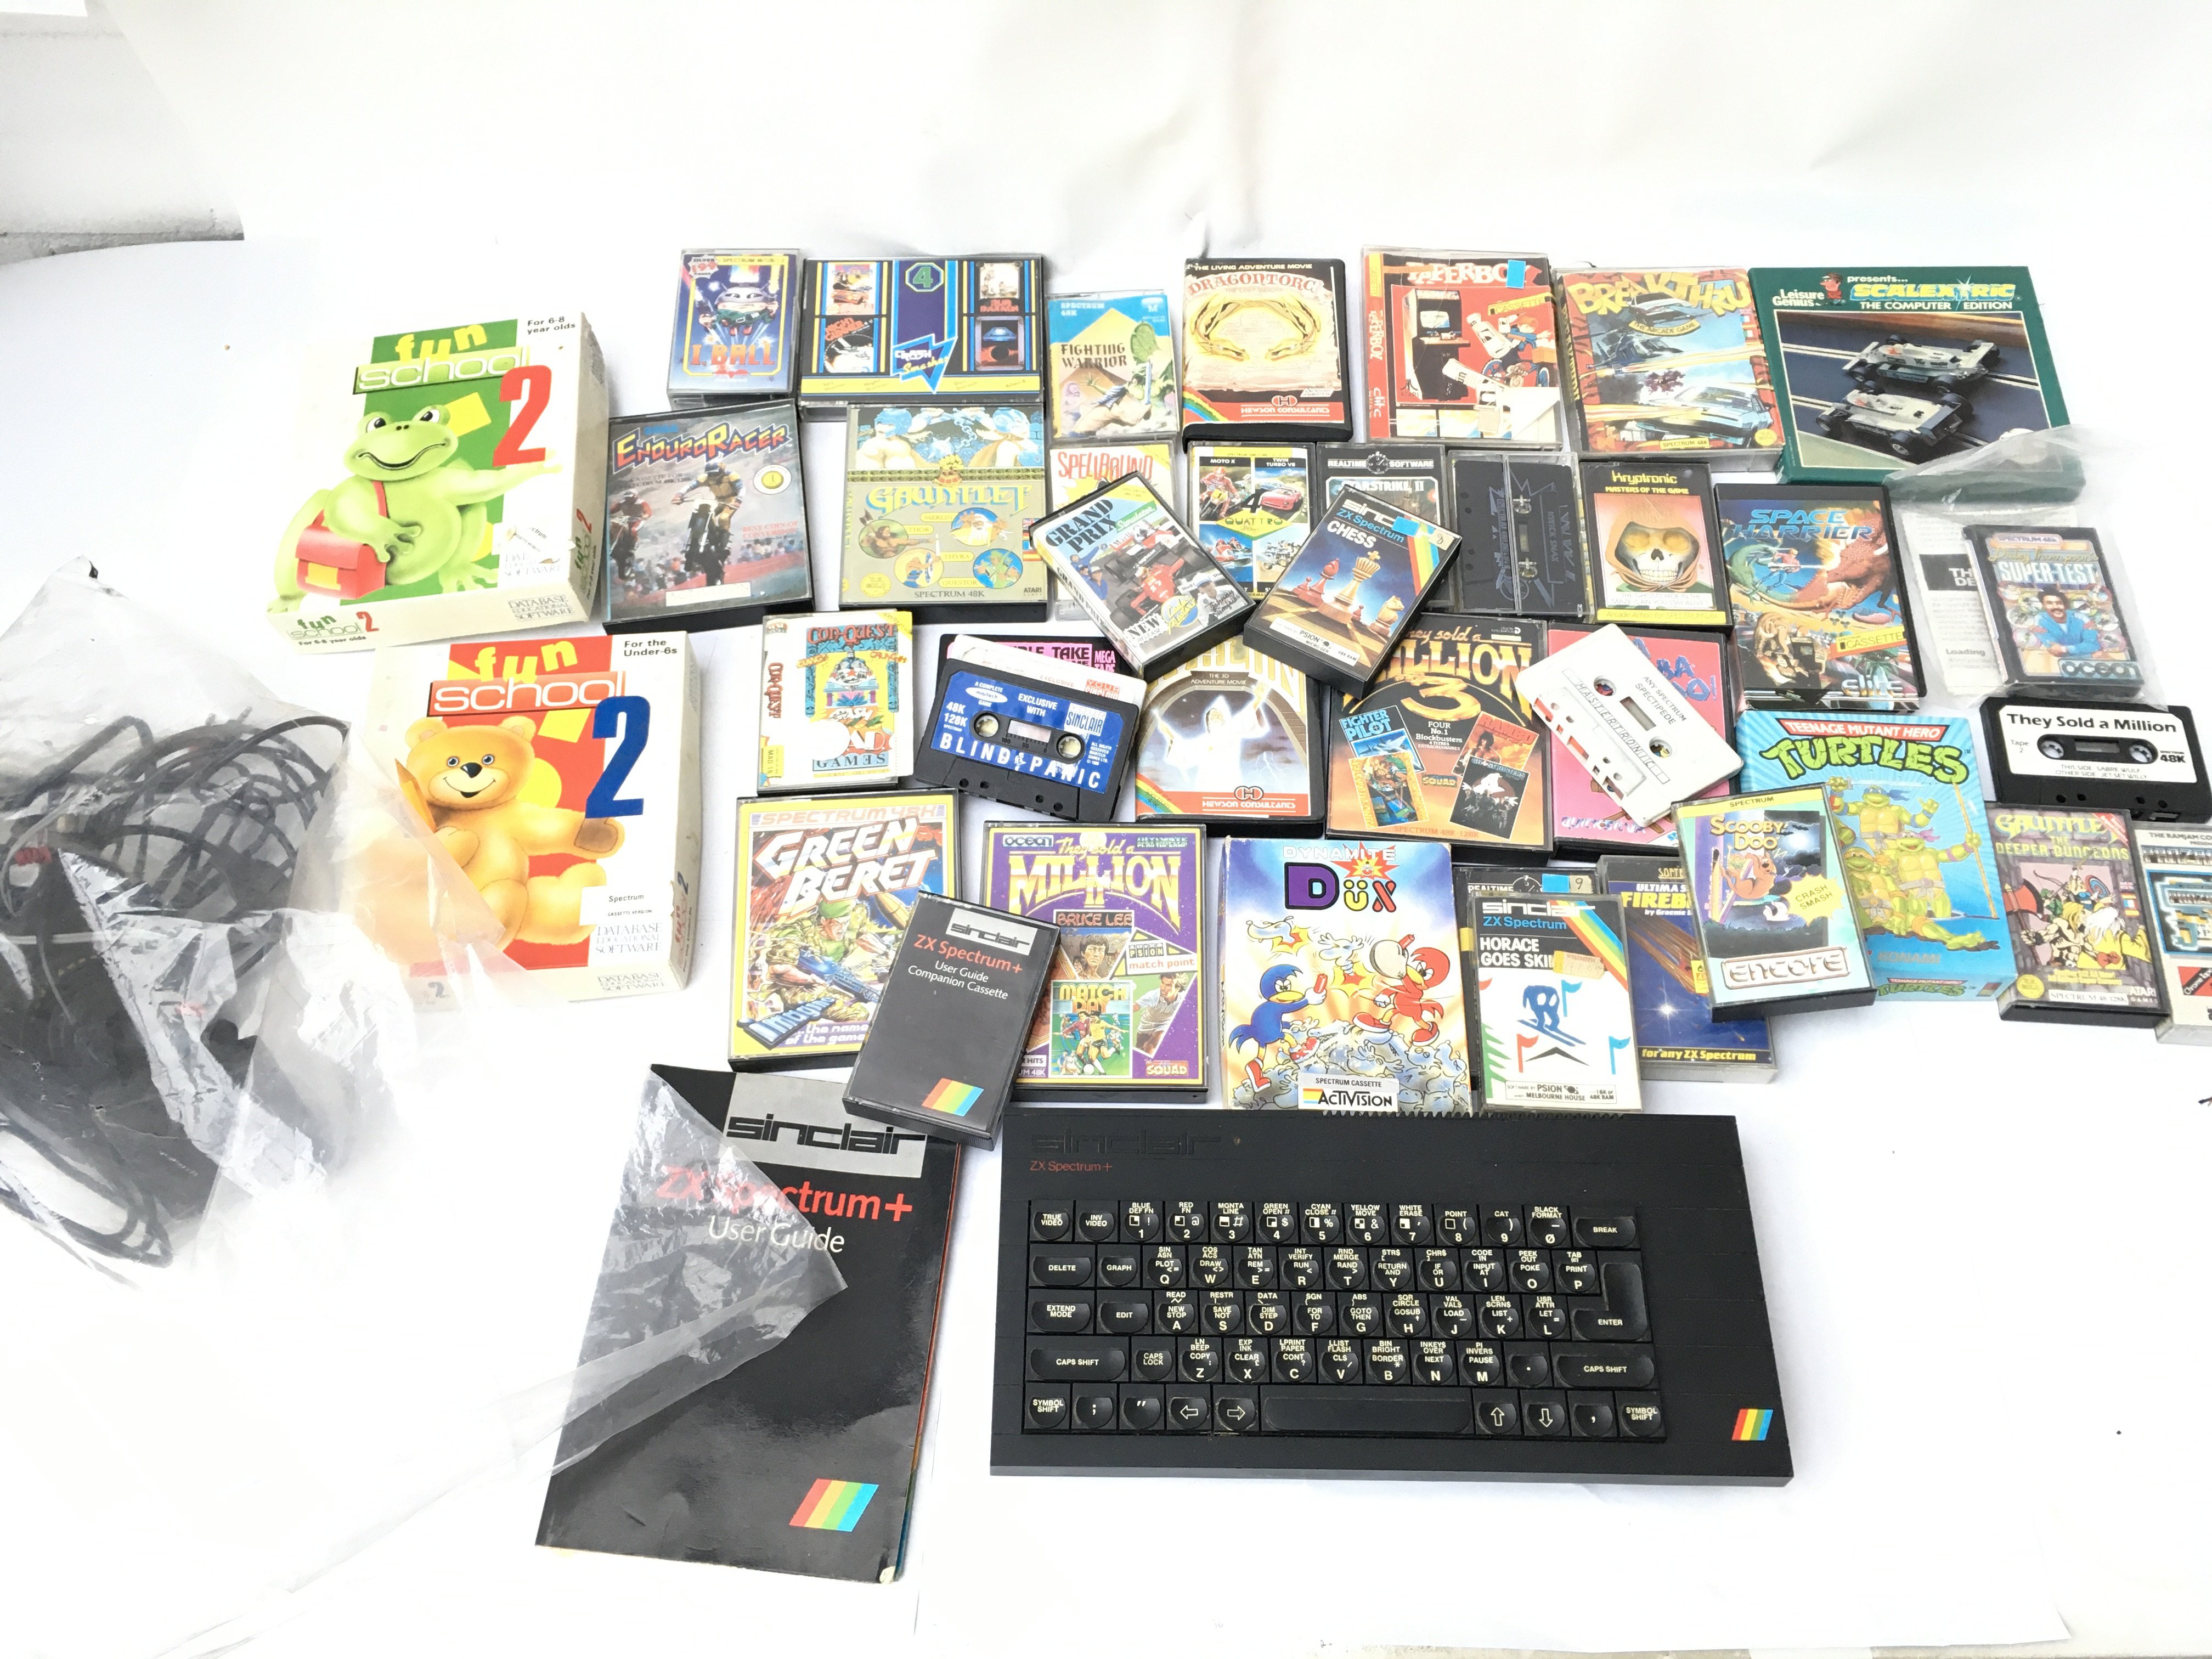 ZX Spectrum + Including a large number of games.